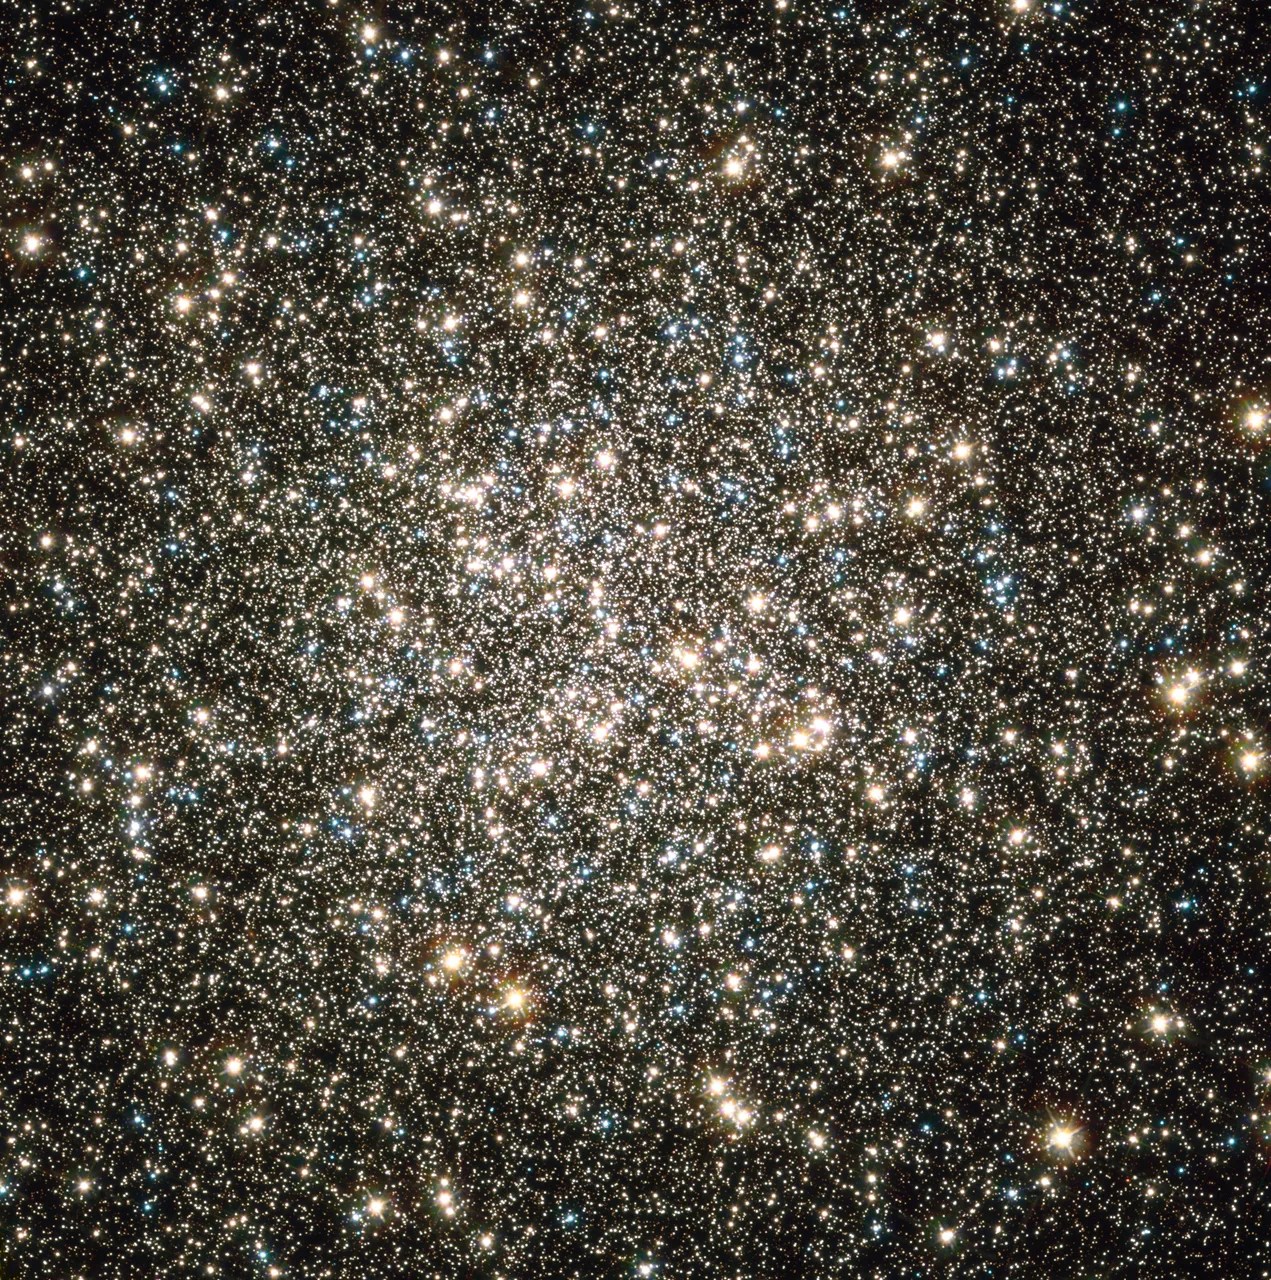 Hubble view of M13